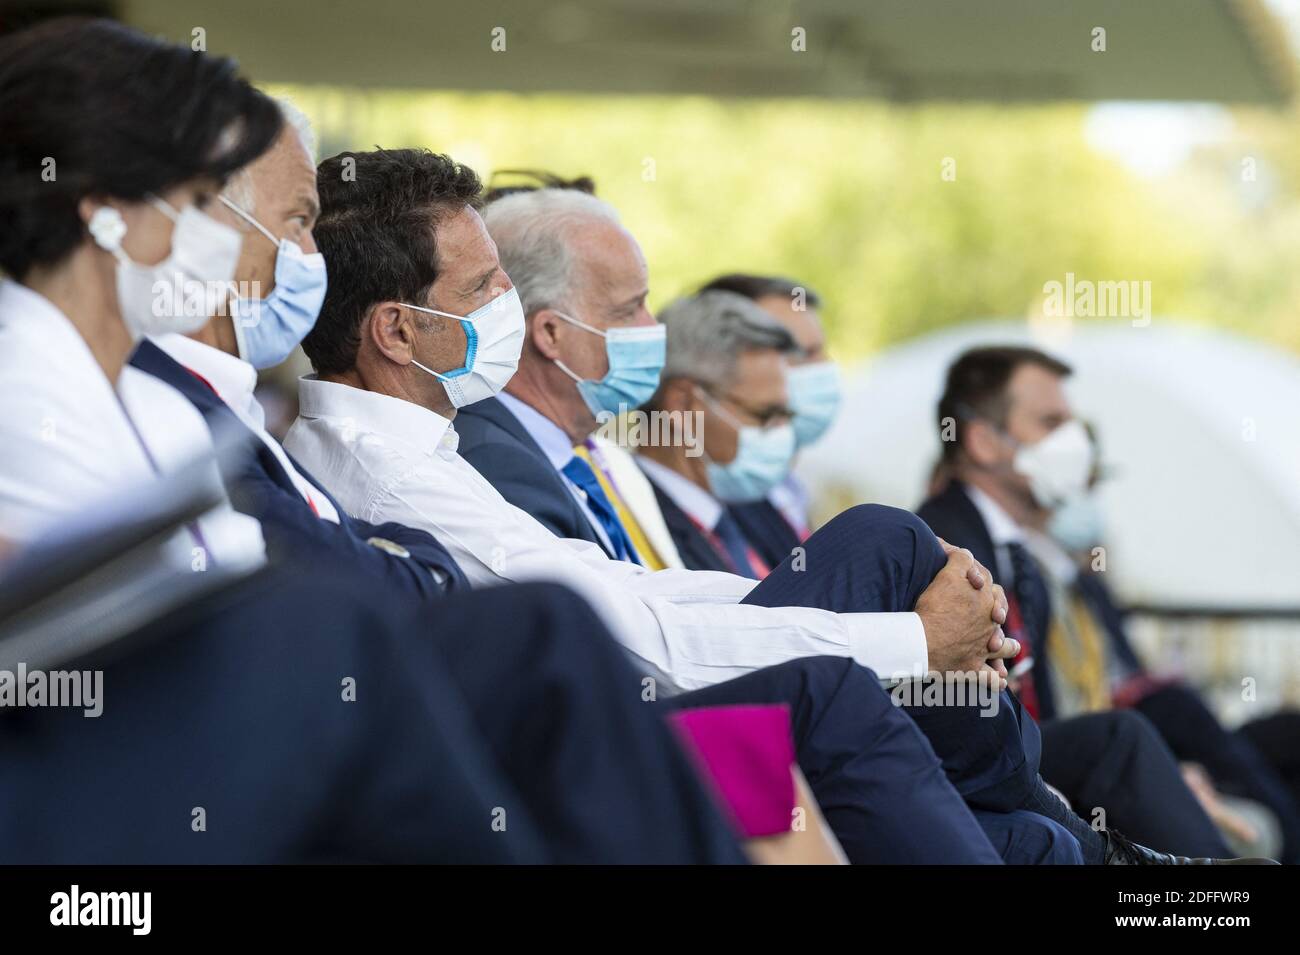 French Employers' association (Medef) President Geoffroy Roux de Bezieux wearing protective face masks attends at the Medef themed 'The Renaissance of French Companies', at the Paris Longchamp Racecourse in Paris, on August 26, 2020.Photo by Eliot Blondet/ABACAPRESS.COM Stock Photo